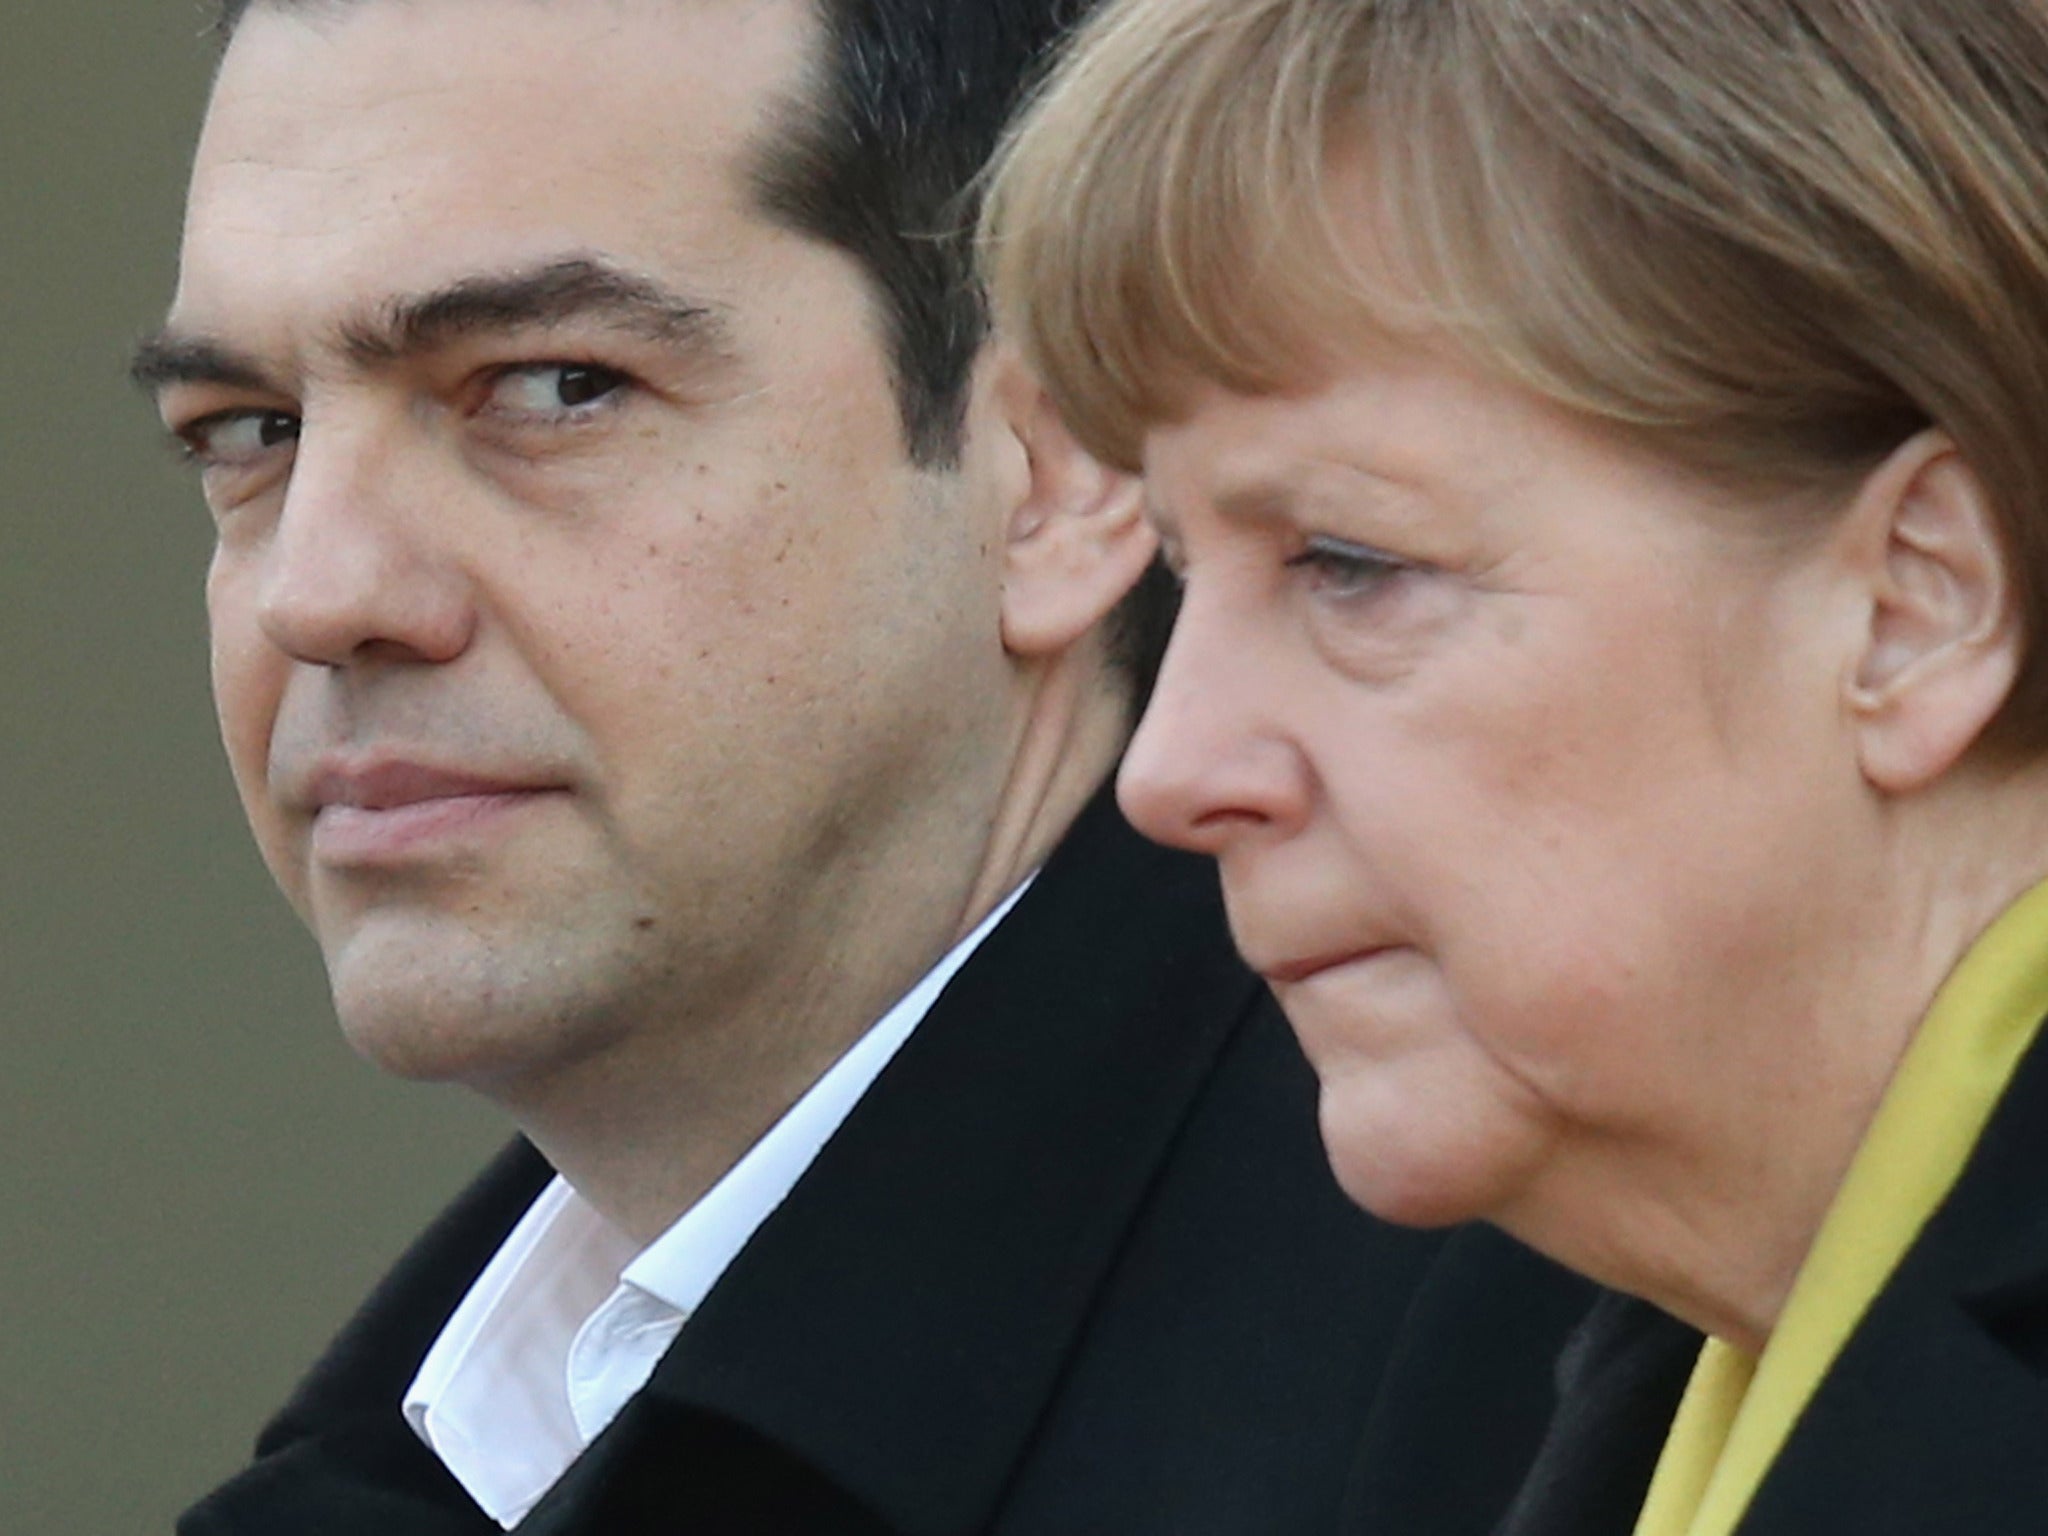 Germany has taken an increasinly tough line on Greece, demanding guarantees Athens will observe proposed austerity measures